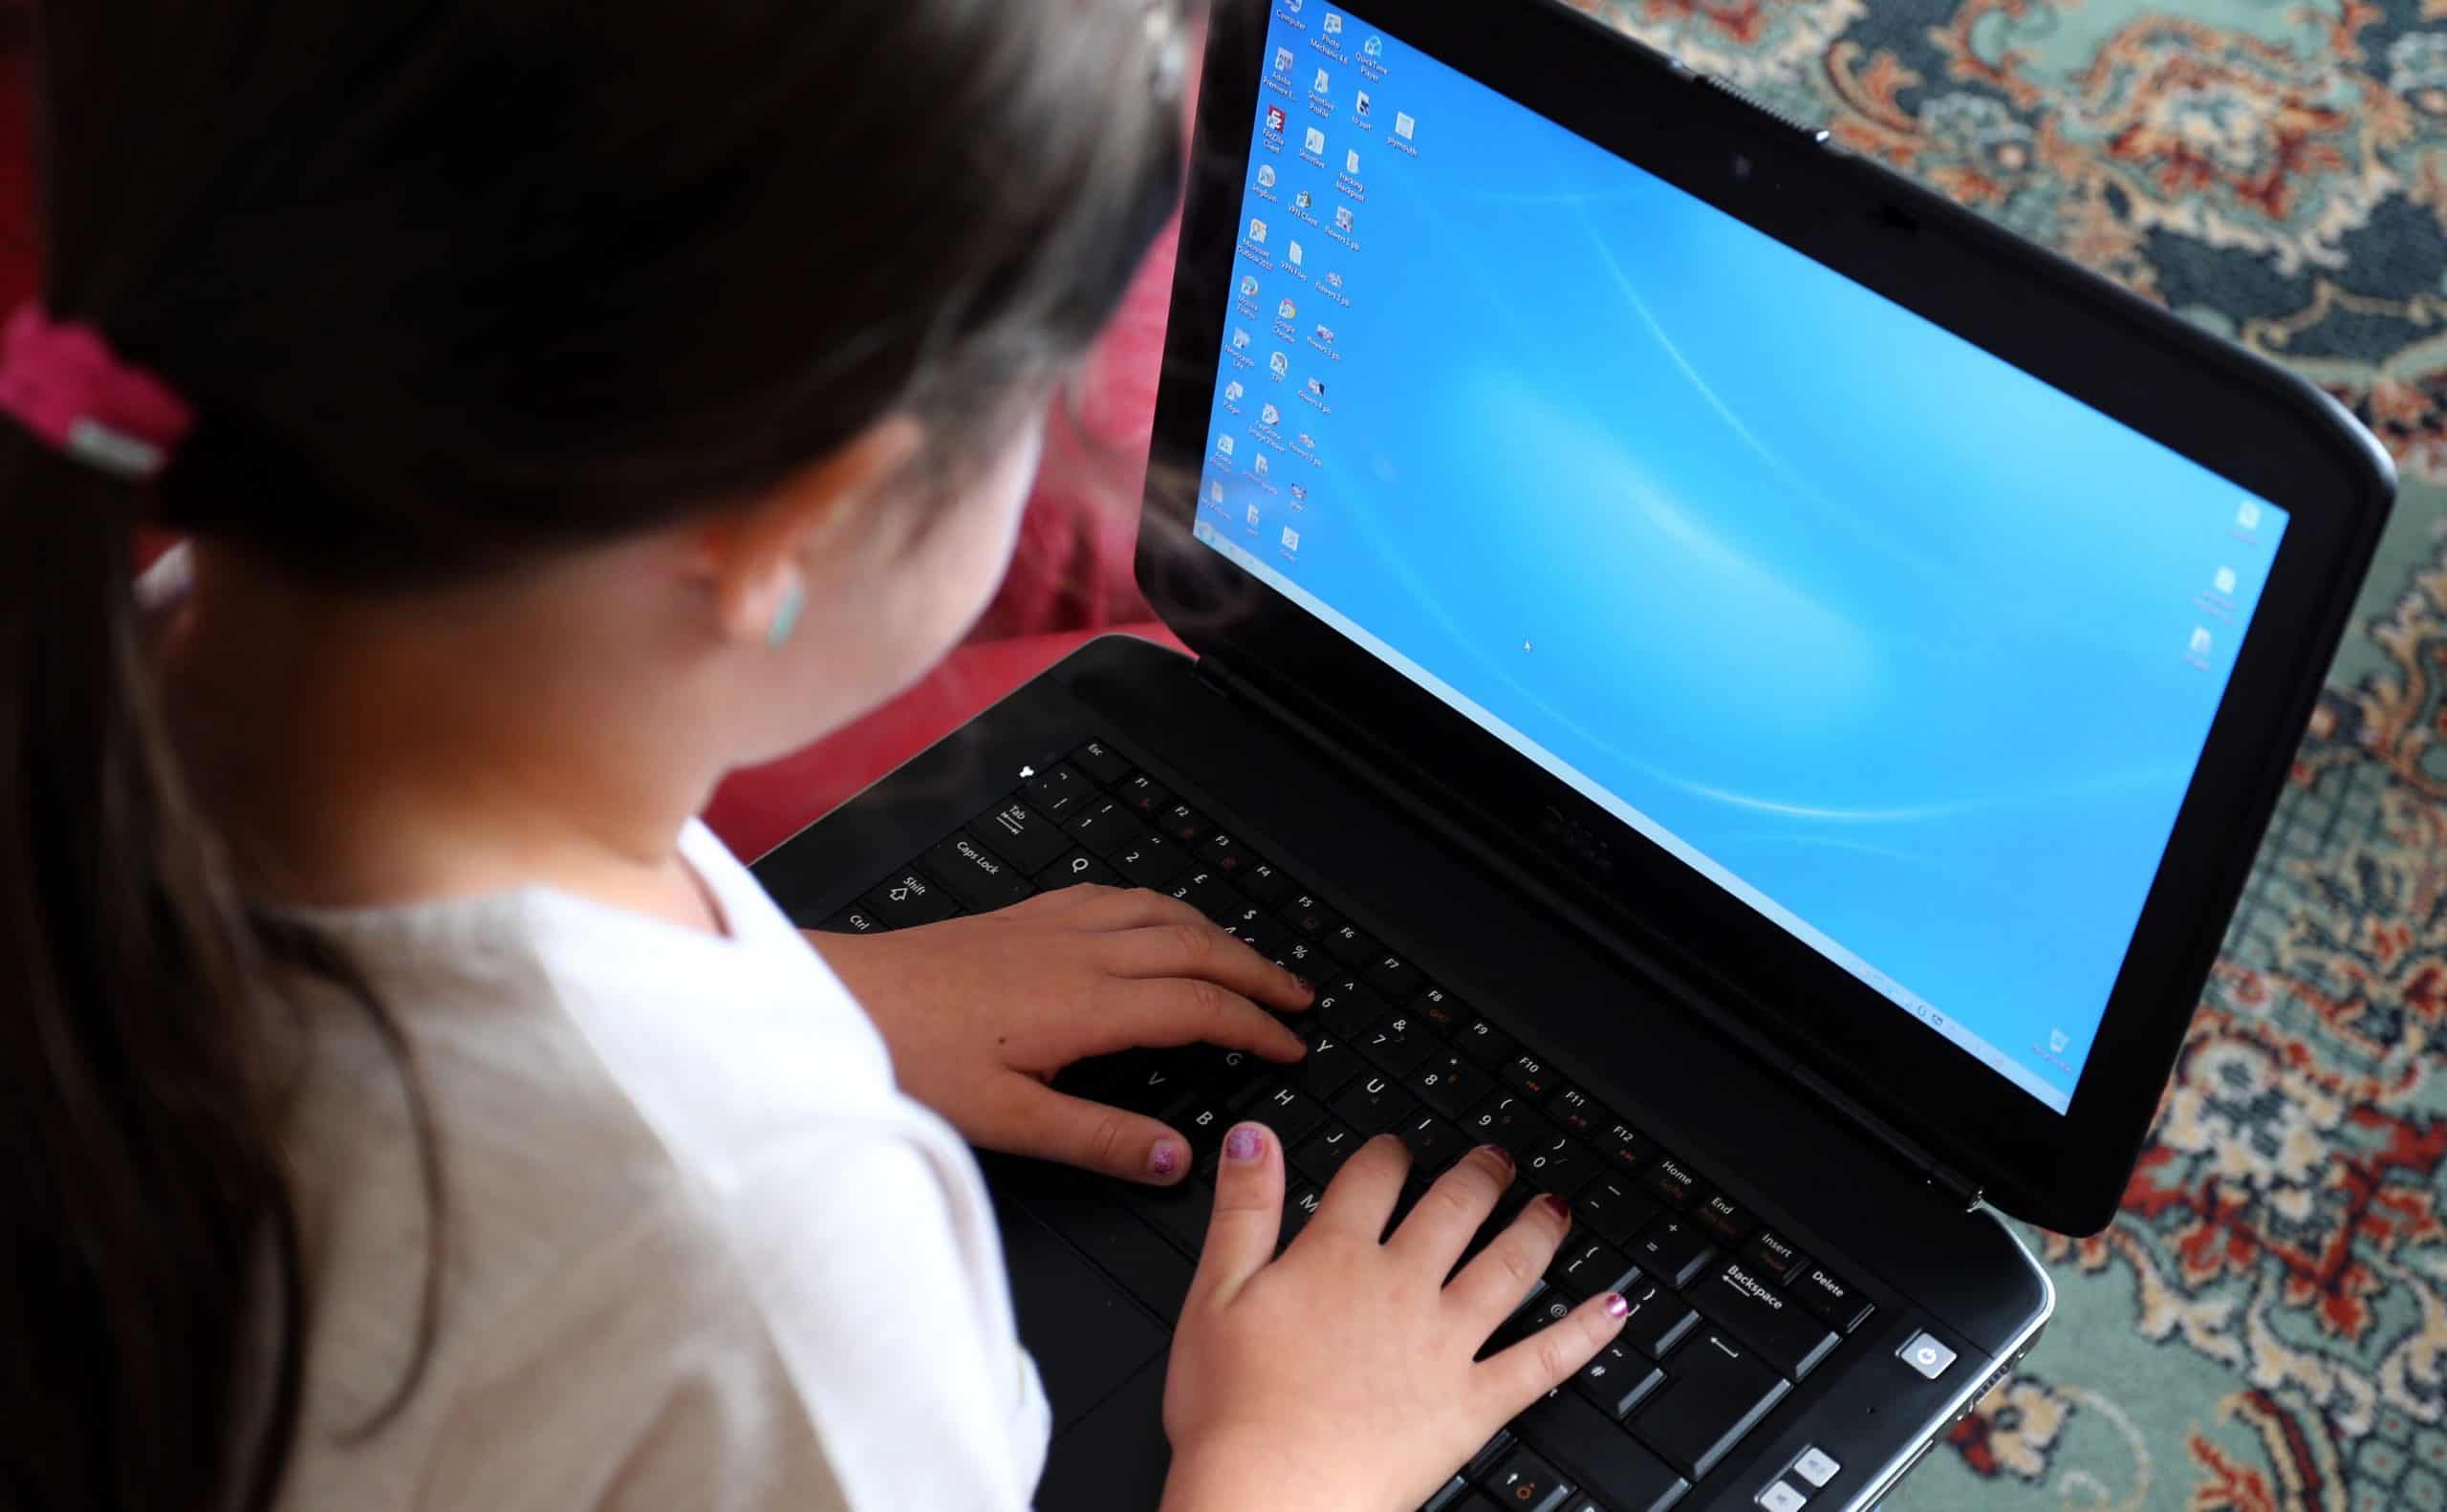 Campaign calls for public to donate unused laptops as up to 1.8 million children have no access